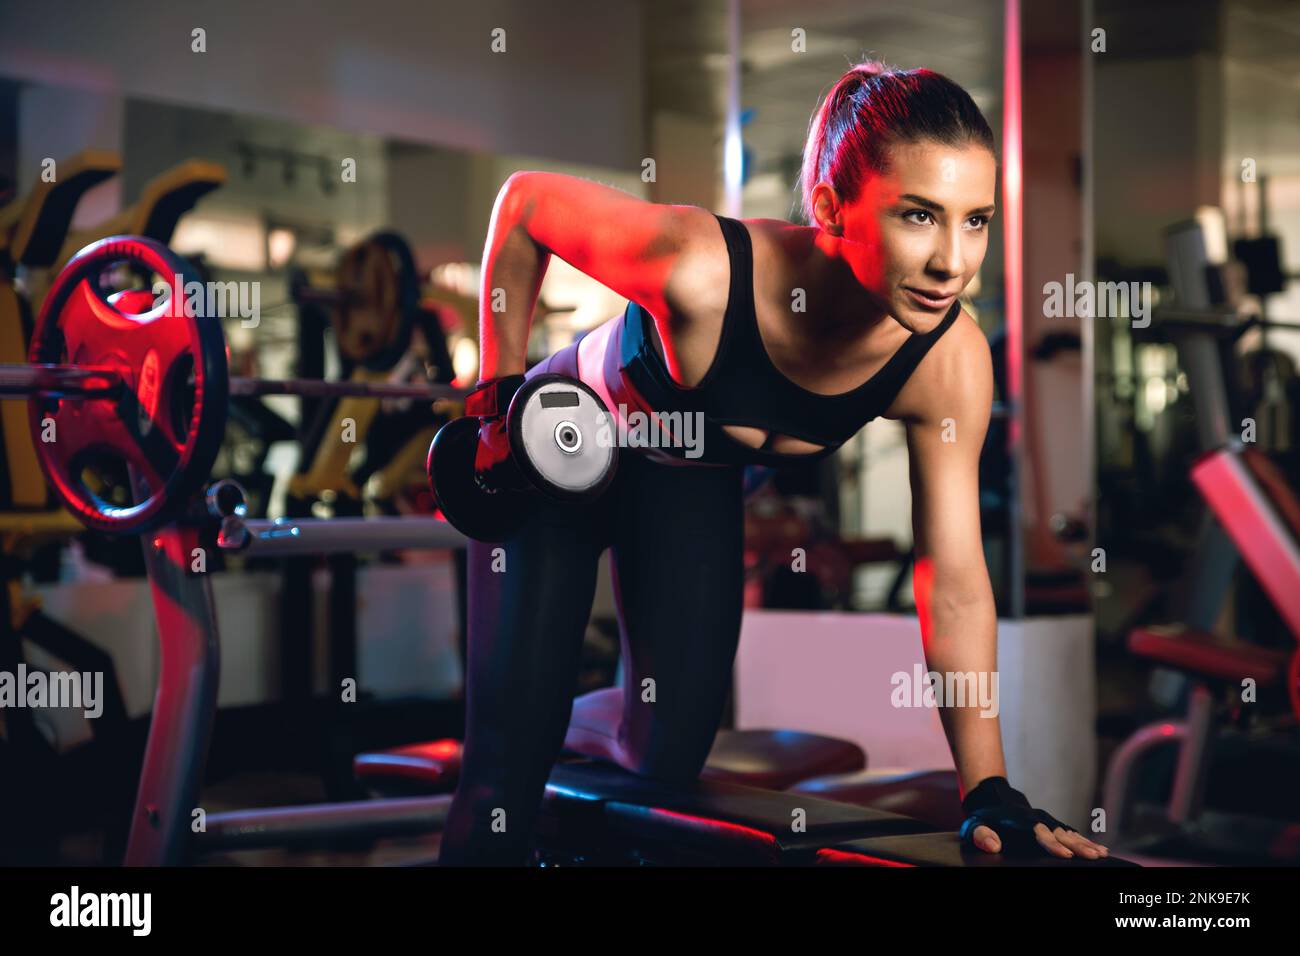 One 30s woman with black tops and tights doing one arm dumbbell lateral workout with dumbbells in a gym. Stock Photo